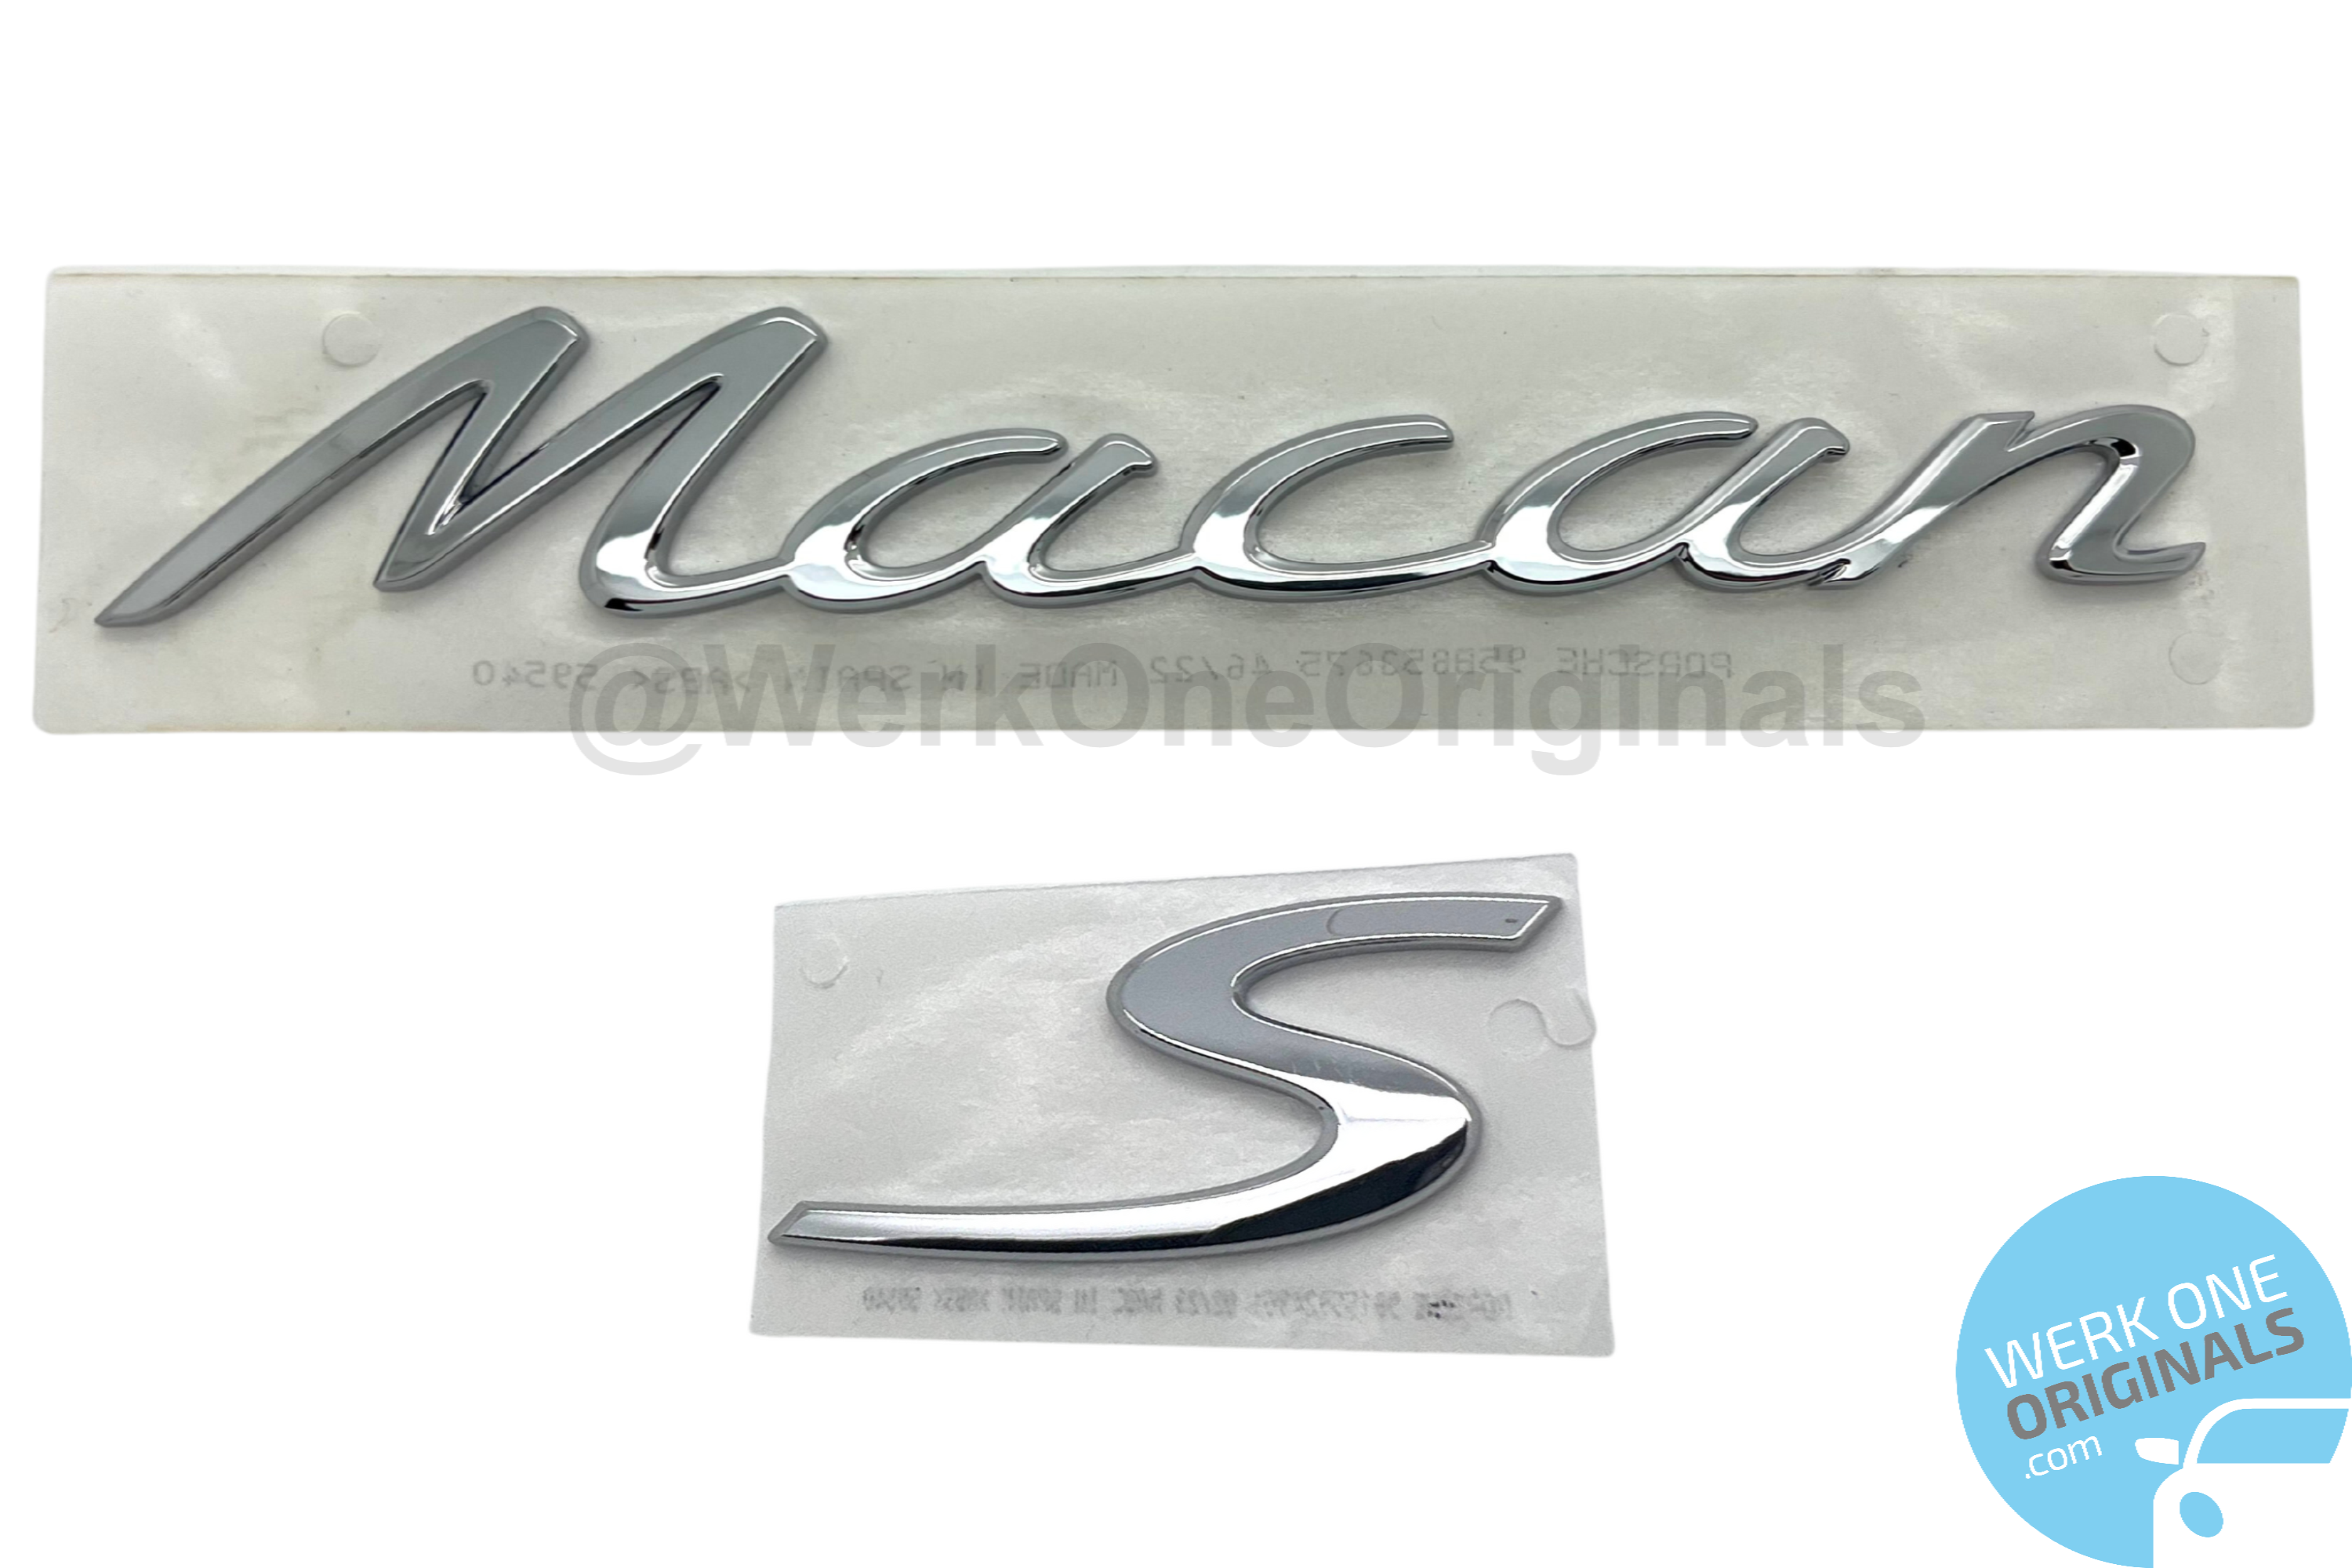 Porsche Official 'Macan S' Rear Badge Logo in Chrome Silver for Macan S Models